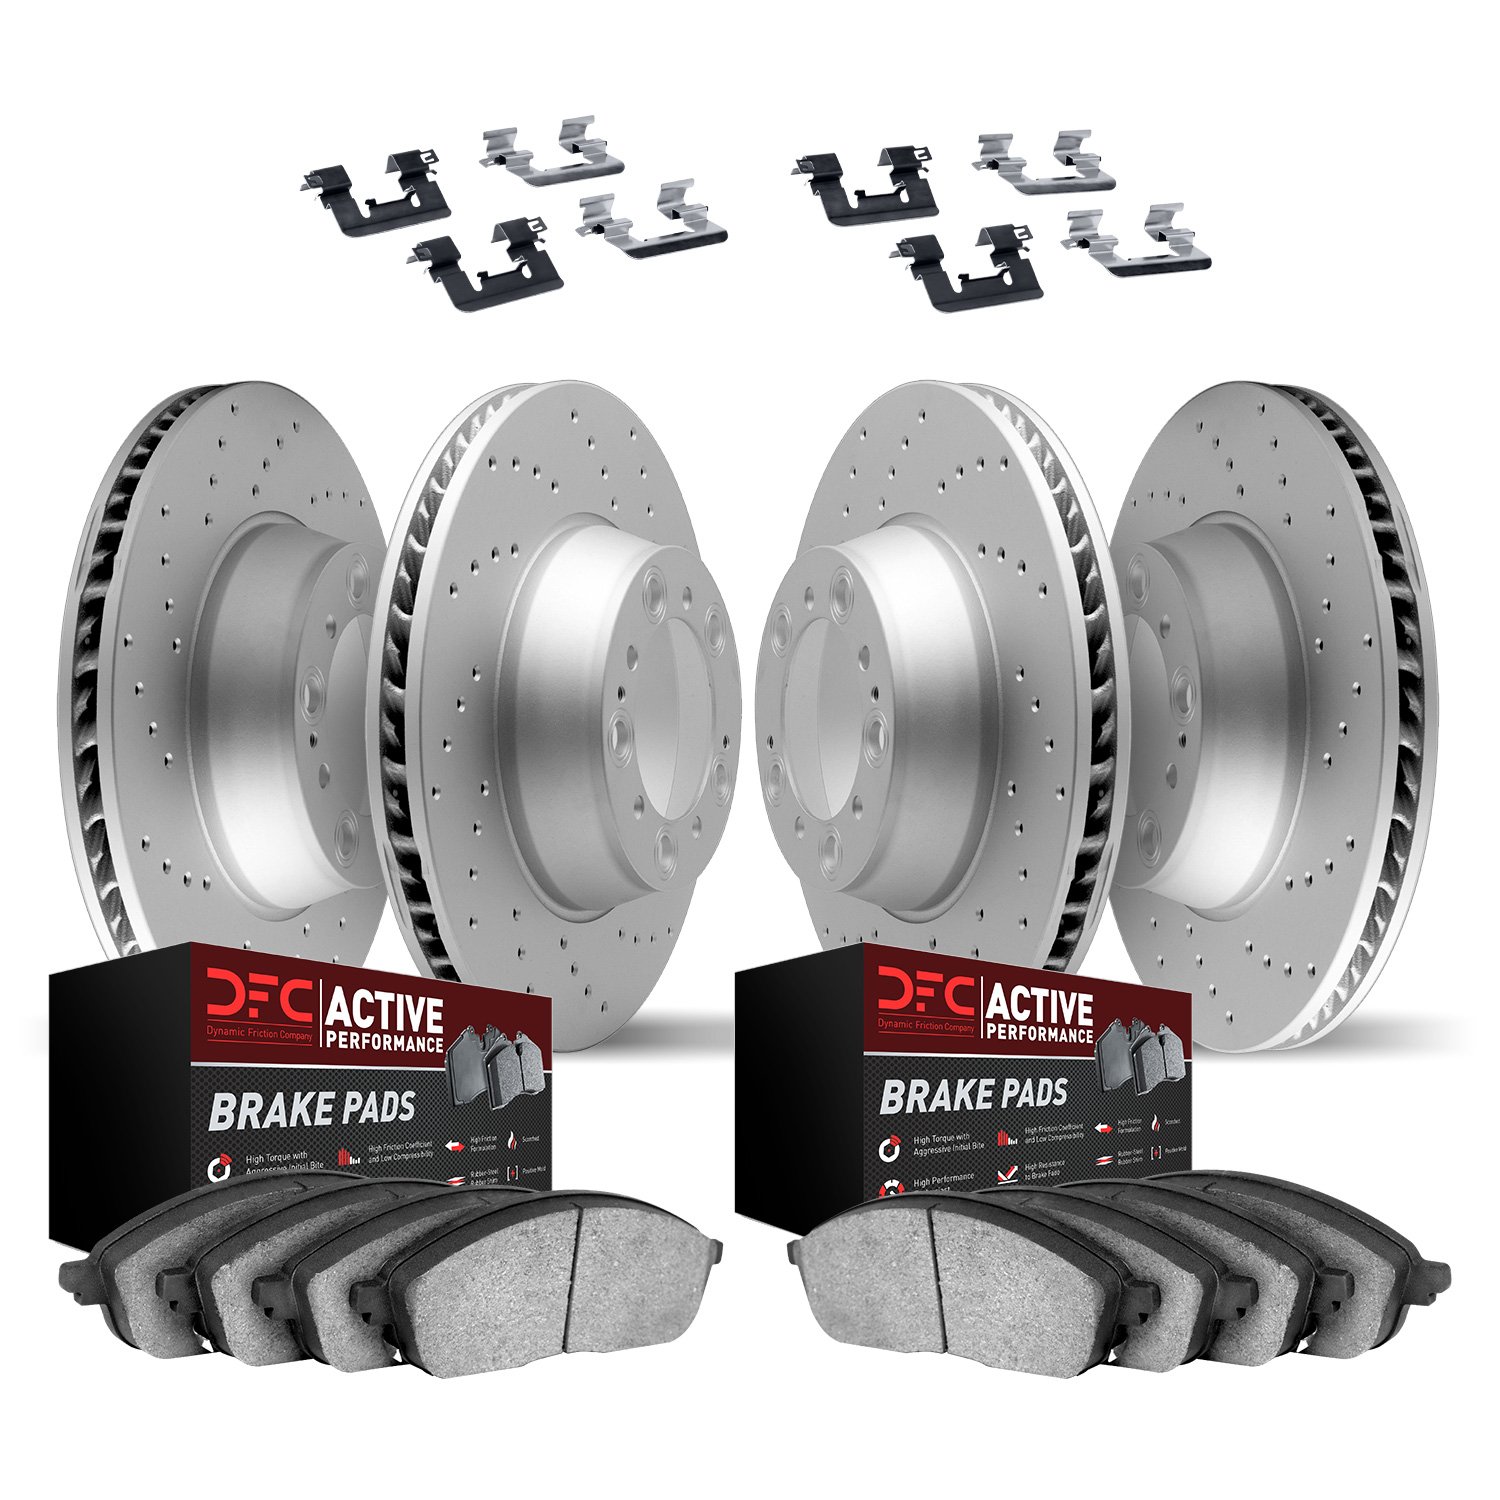 2714-42000 Geoperformance Drilled Brake Rotors with Active Performance Pads Kit & Hardware, Fits Select Mopar, Position: Front a